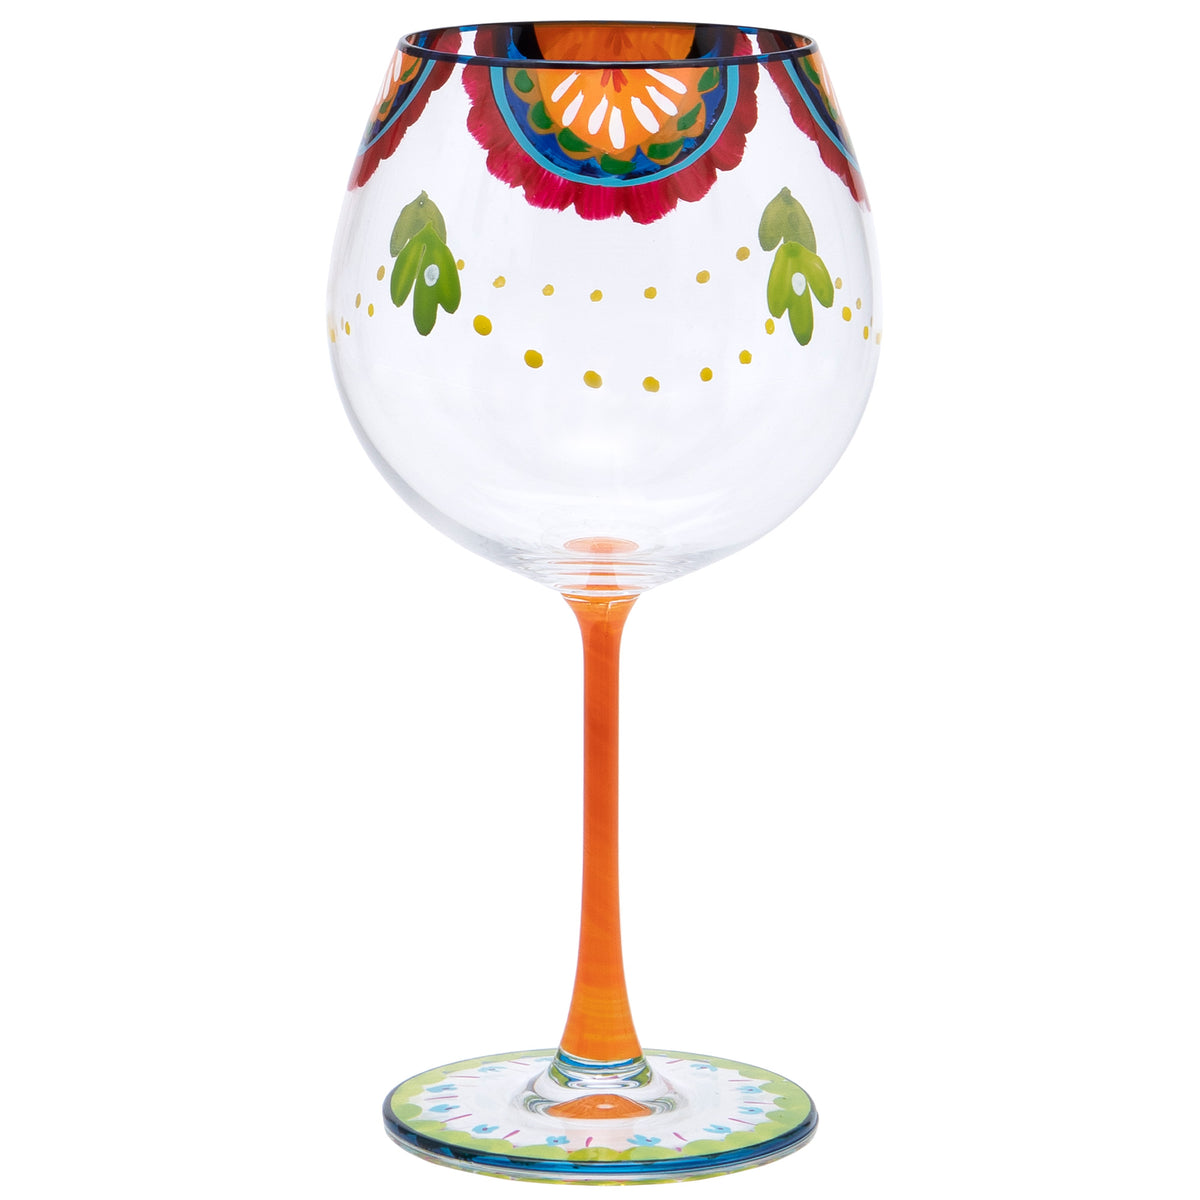 Hand Painted Pattern Gin Glass